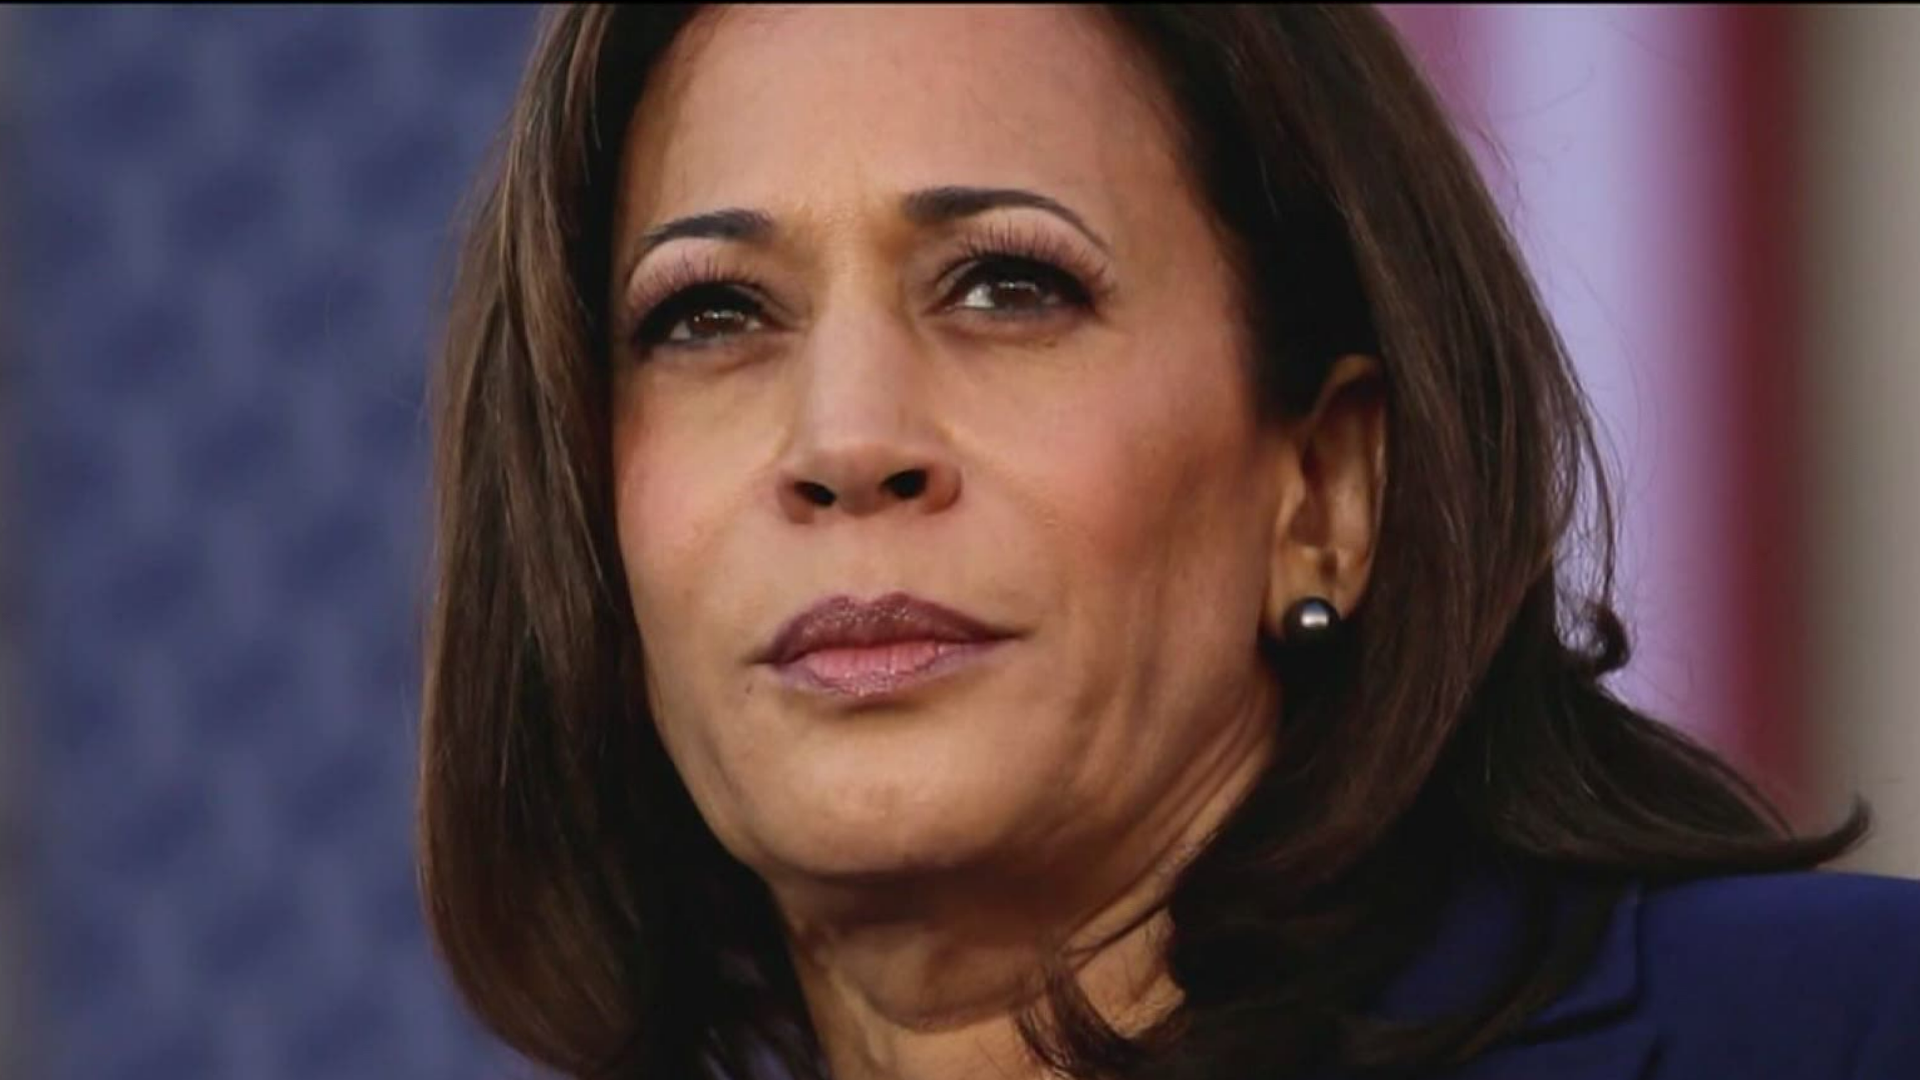 Vice President-elect Kamala Harris will become the first woman Vice President in the nation's 243 year history. She will also be the first Black, South Asian VP.